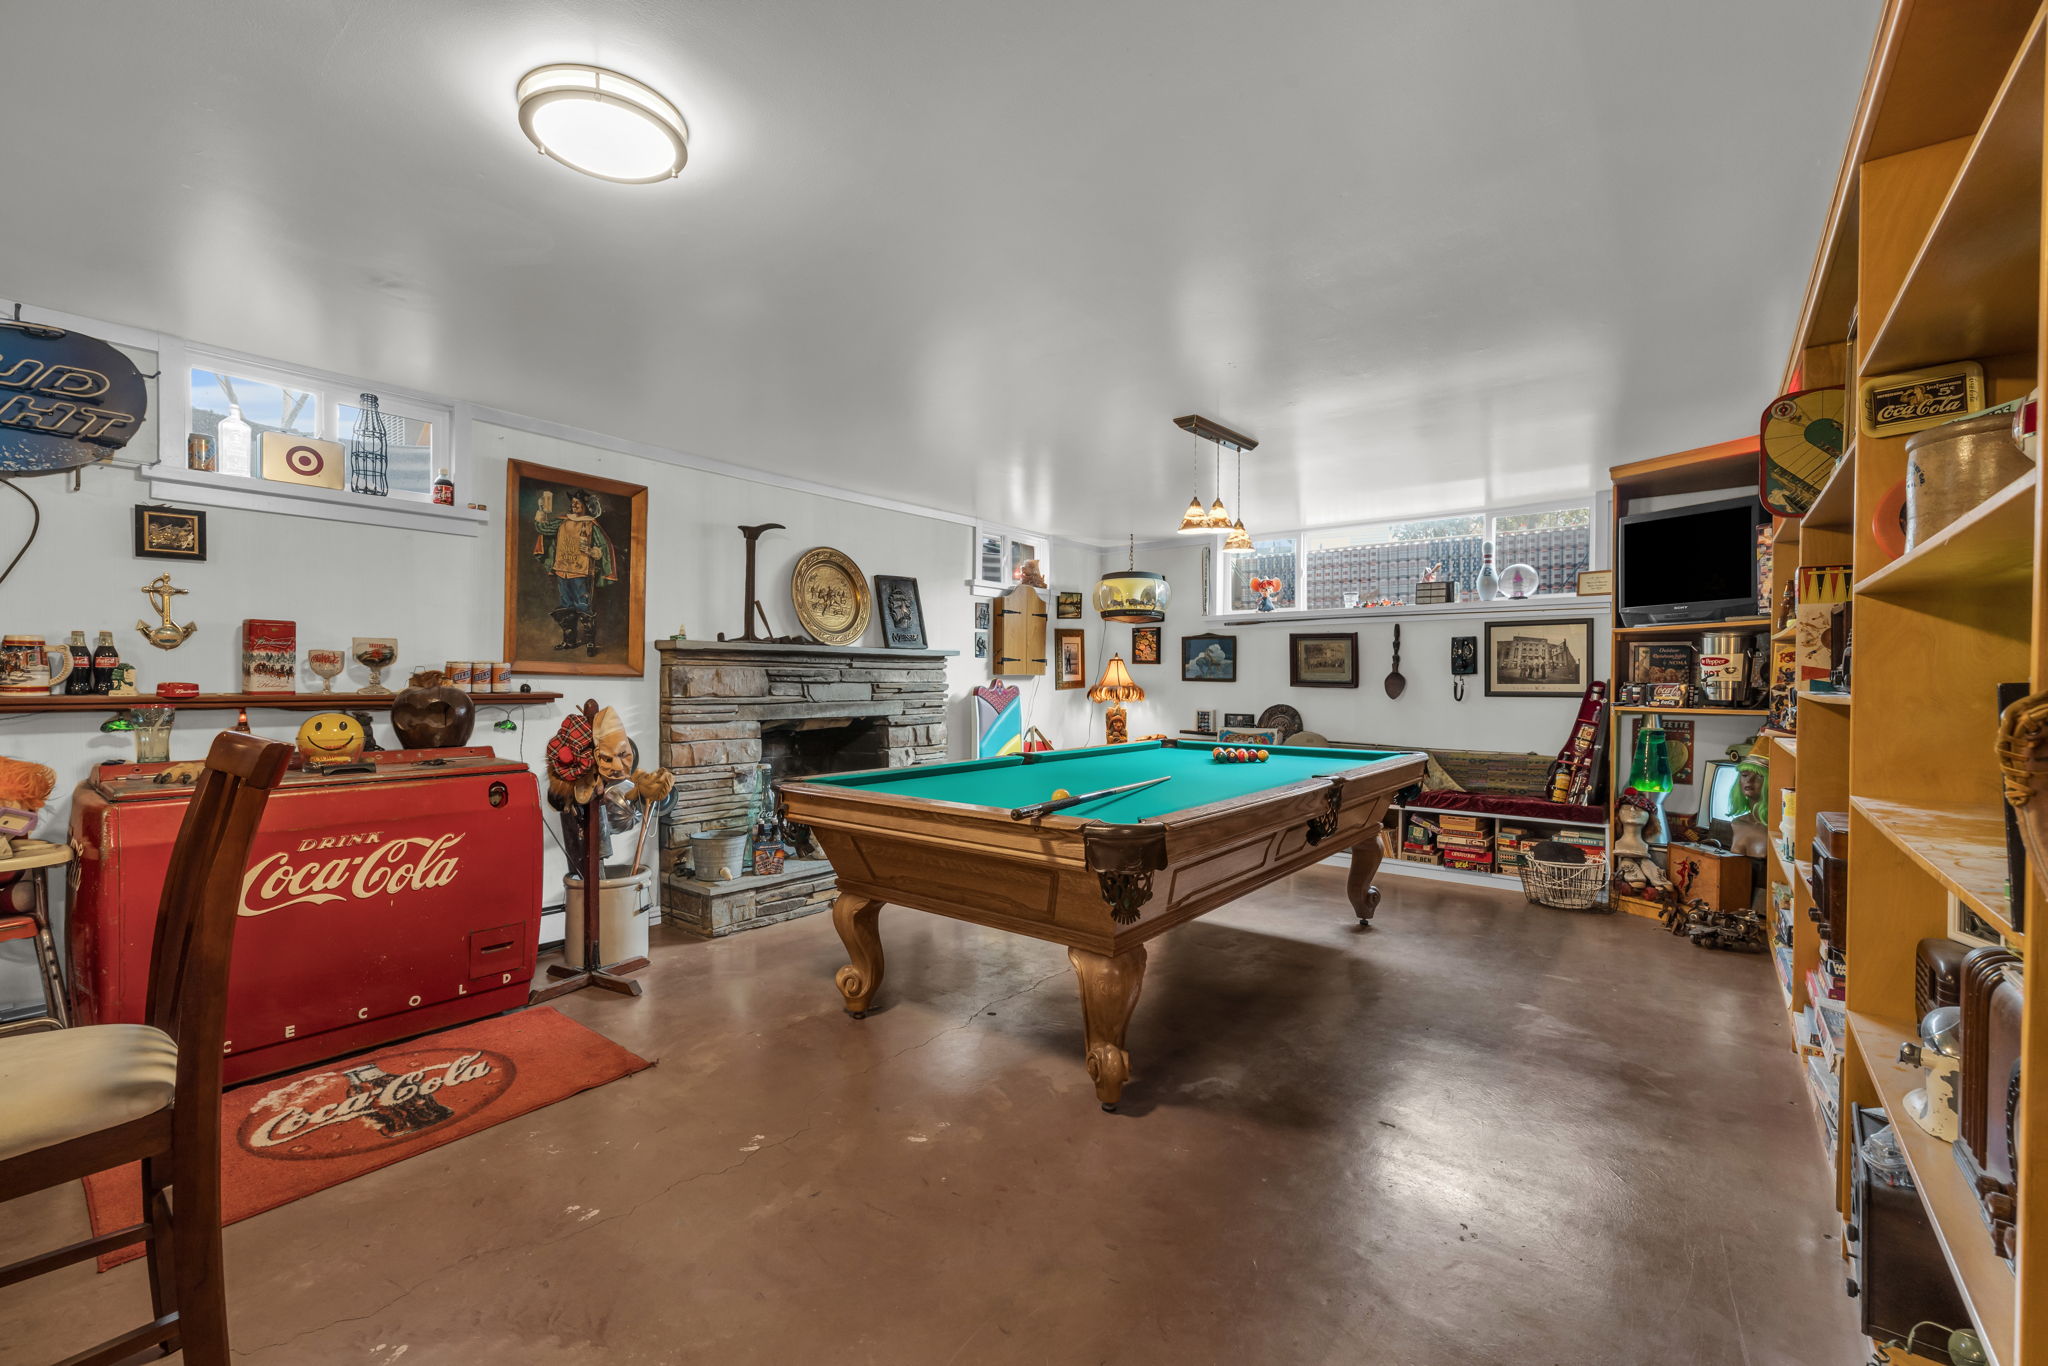 The ULTIMATE basement game room!